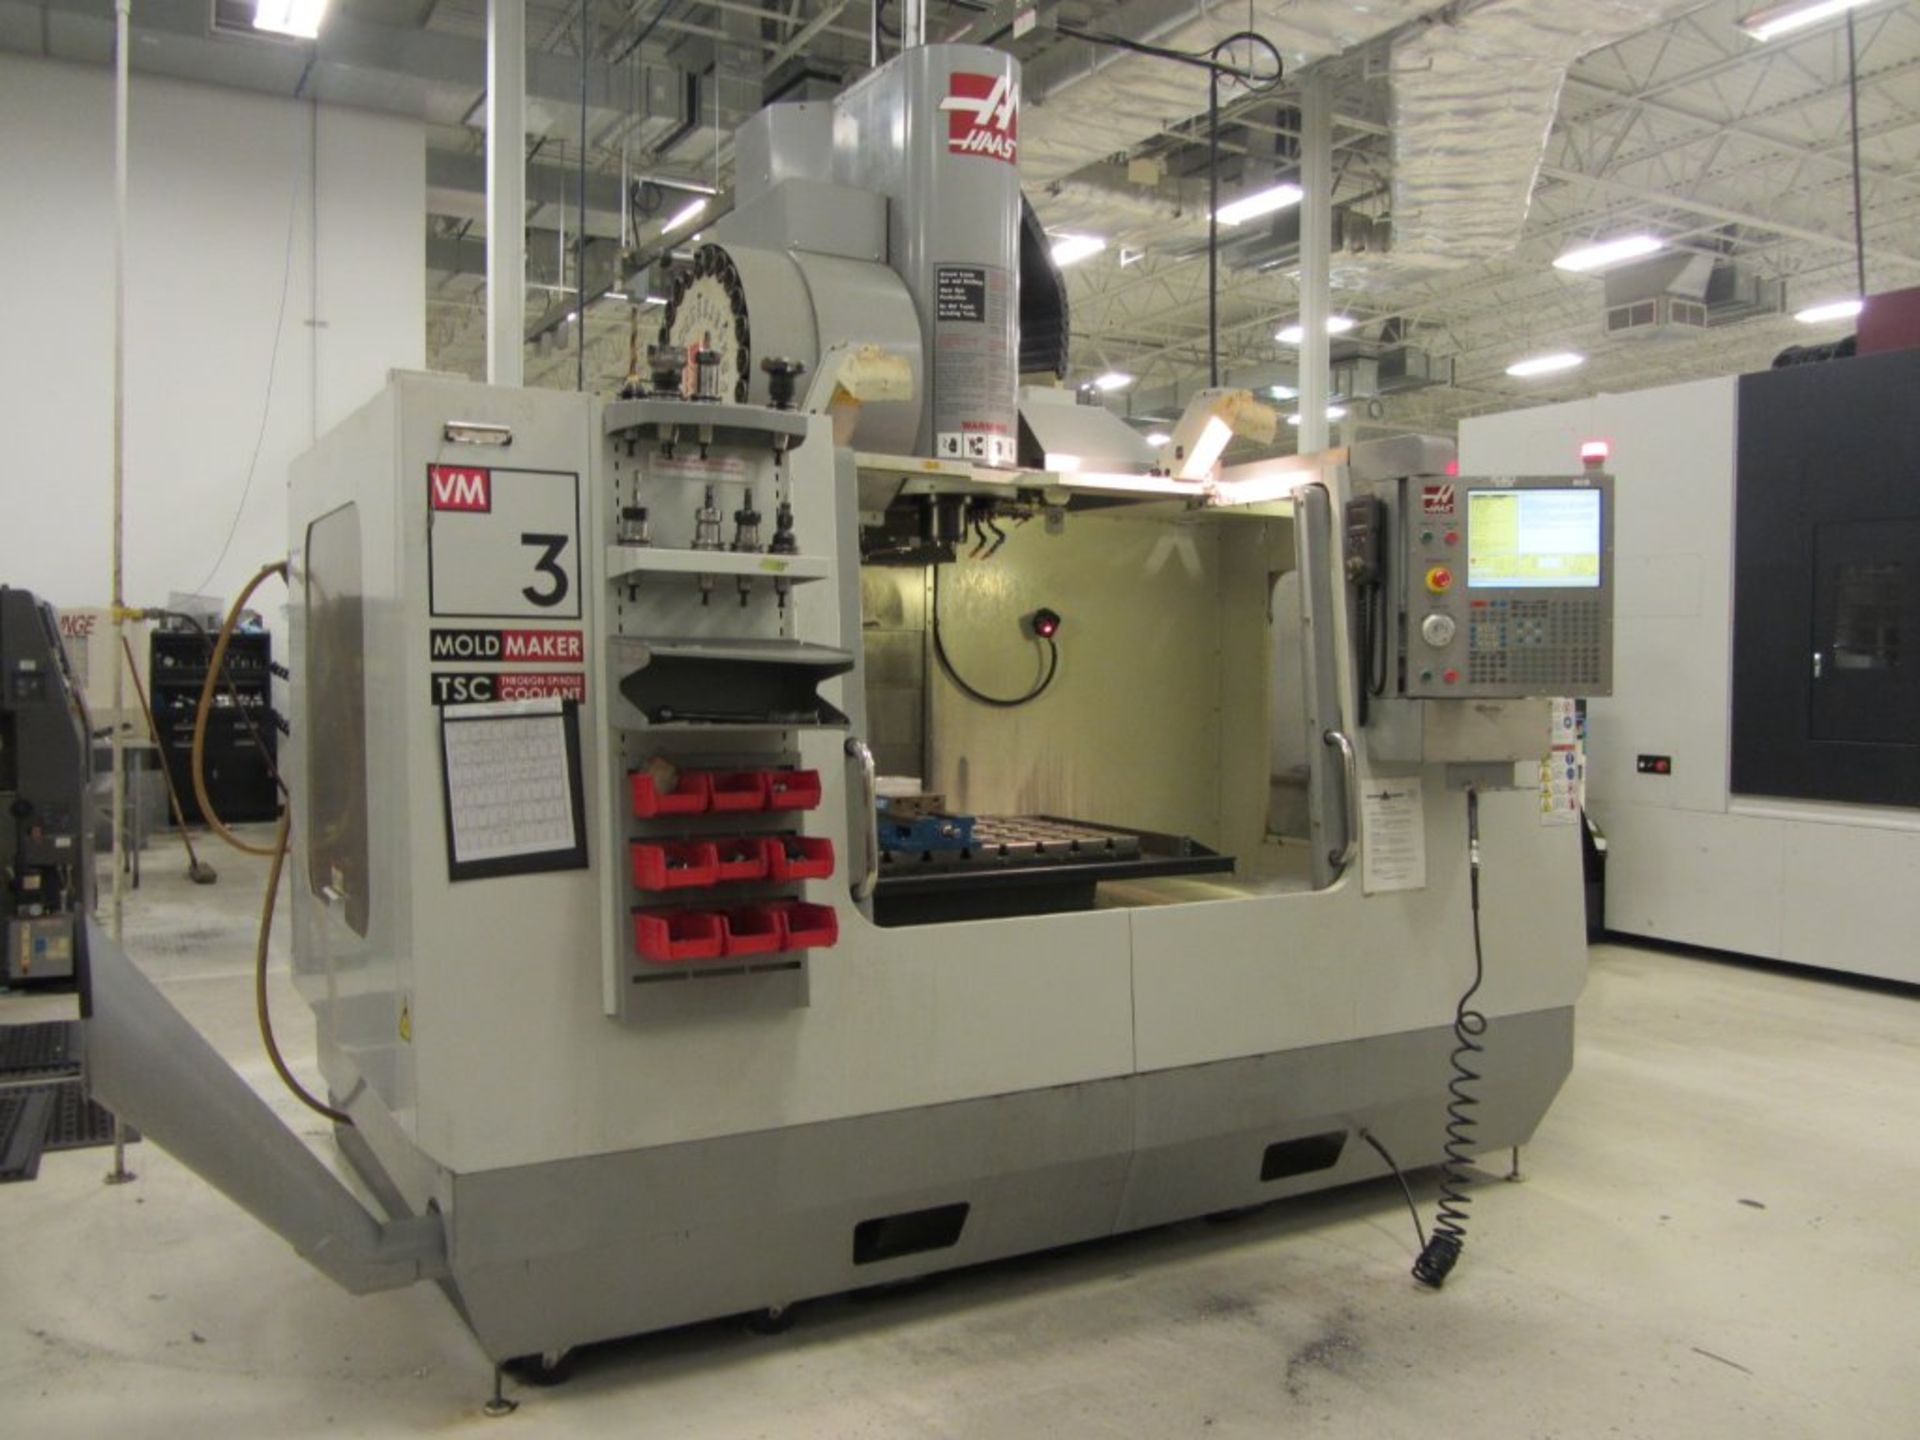 Haas VM-3 Mold Maker CNC Vertical Machining Center with 54'' x 24'' Table, #40 Taper Spindle